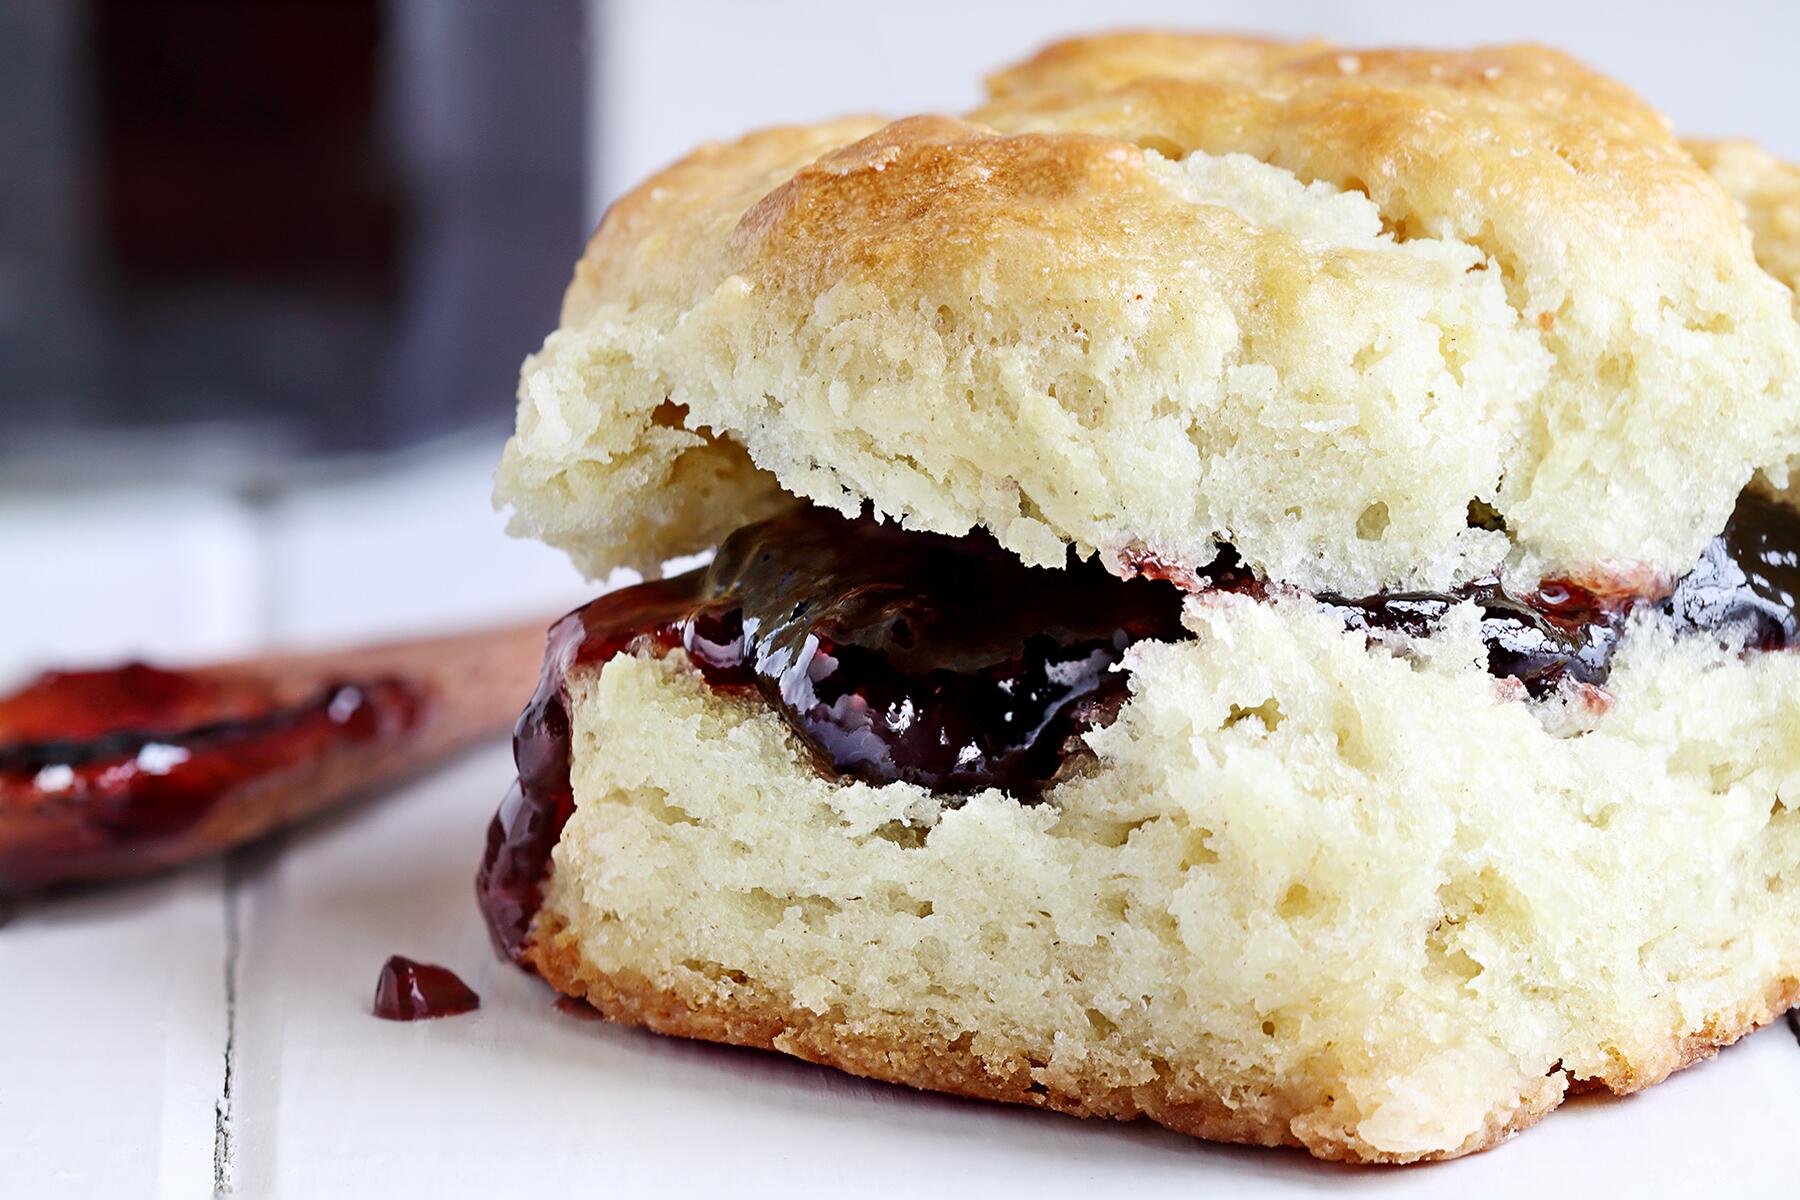 <a href='https://www.fodors.com/world/north-america/usa/south-carolina/charleston/experiences/news/photos/25-ultimate-things-to-do-in-charleston#'>From &quot;30 Ultimate Things to Do in Charleston, South Carolina: Find Your Biscuit Jam &quot;</a>